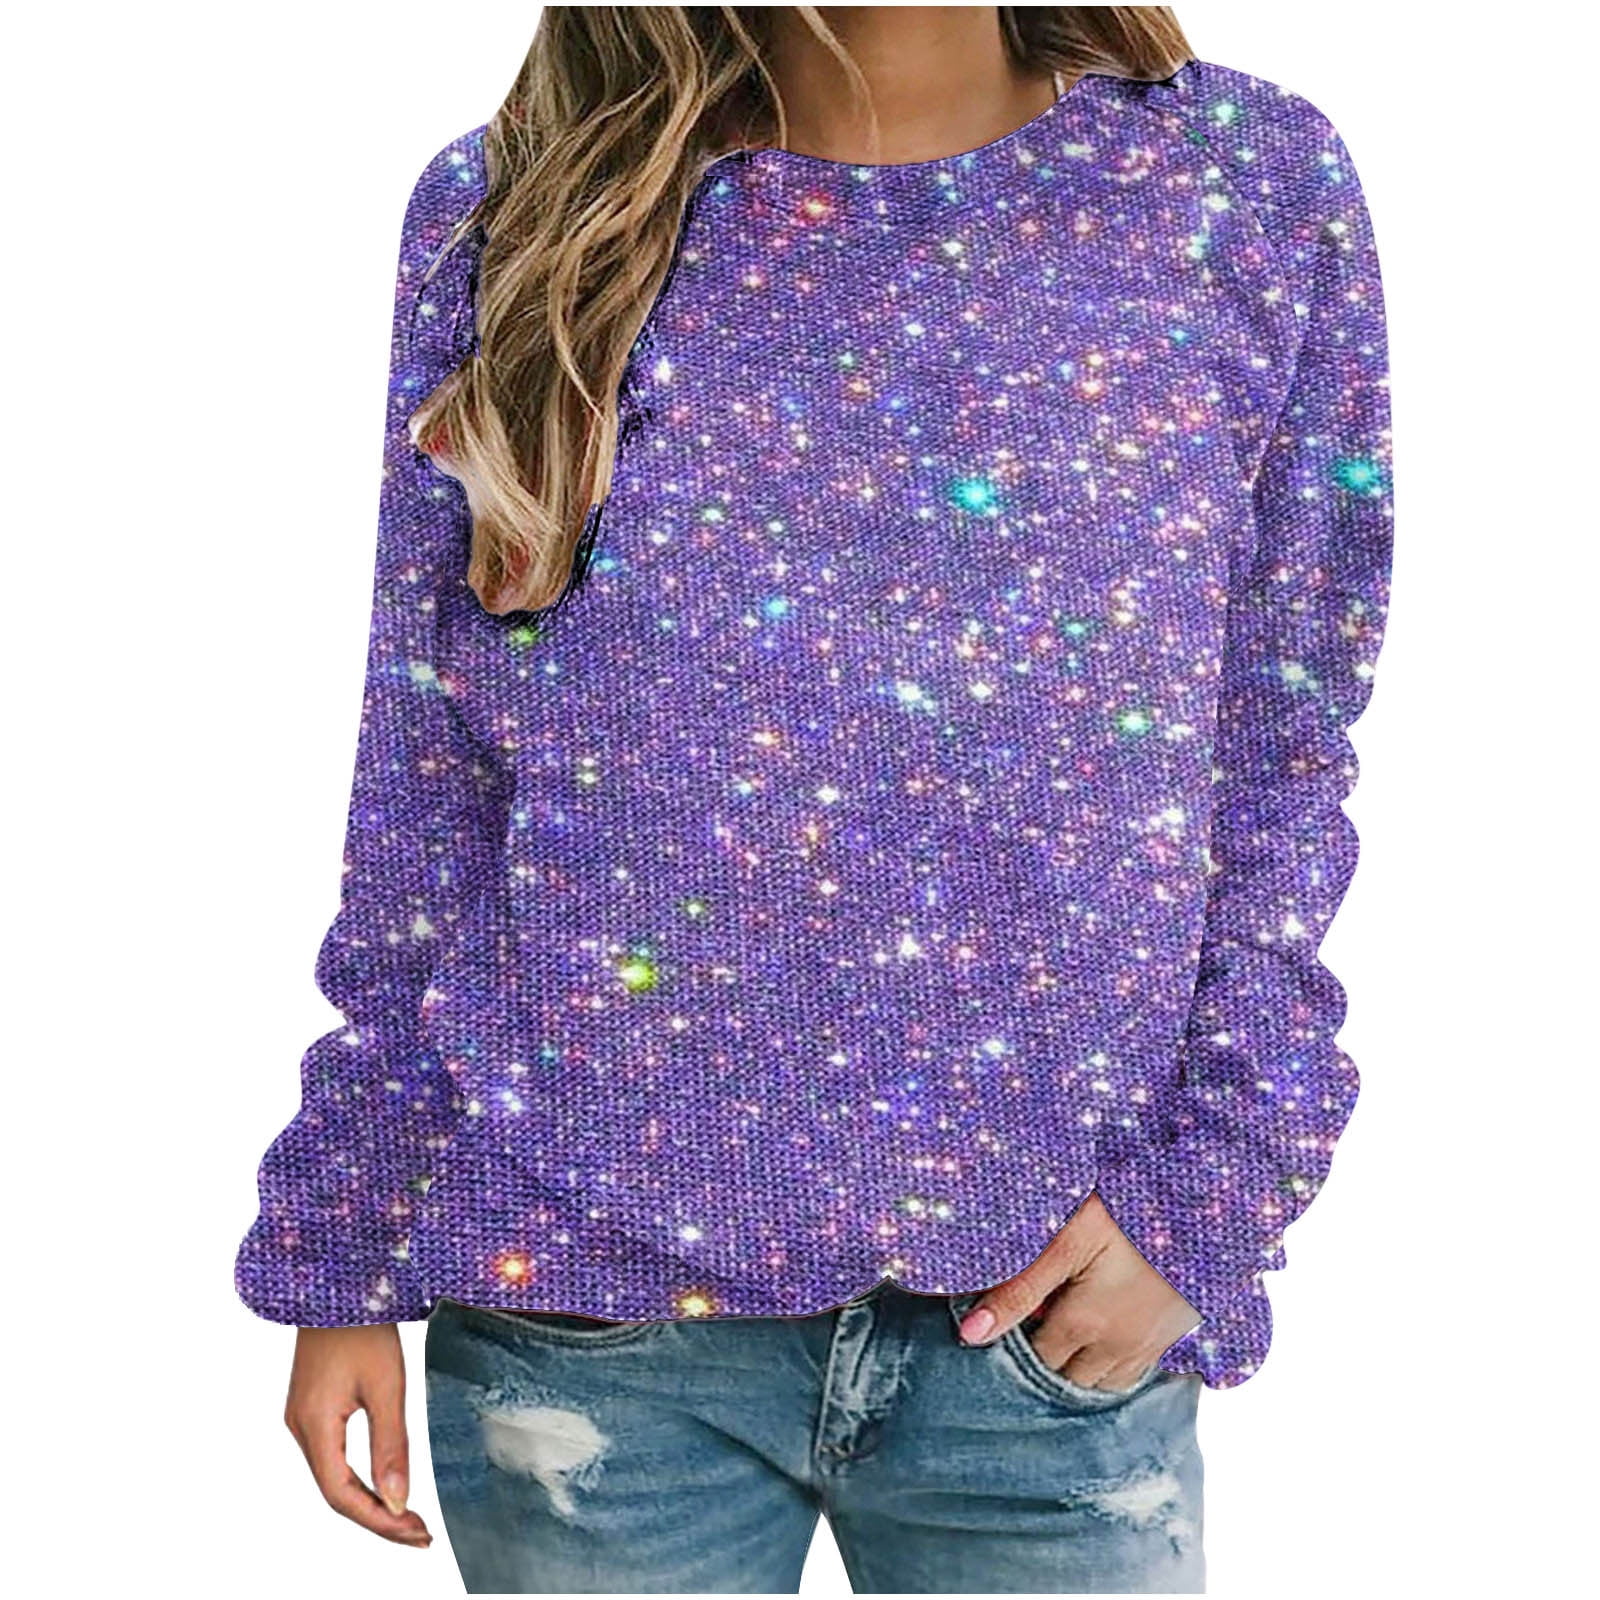 Jalioing 3/4 Sleeve Sequin Blouse for Women Crew Neck Top Sparkly Half ...